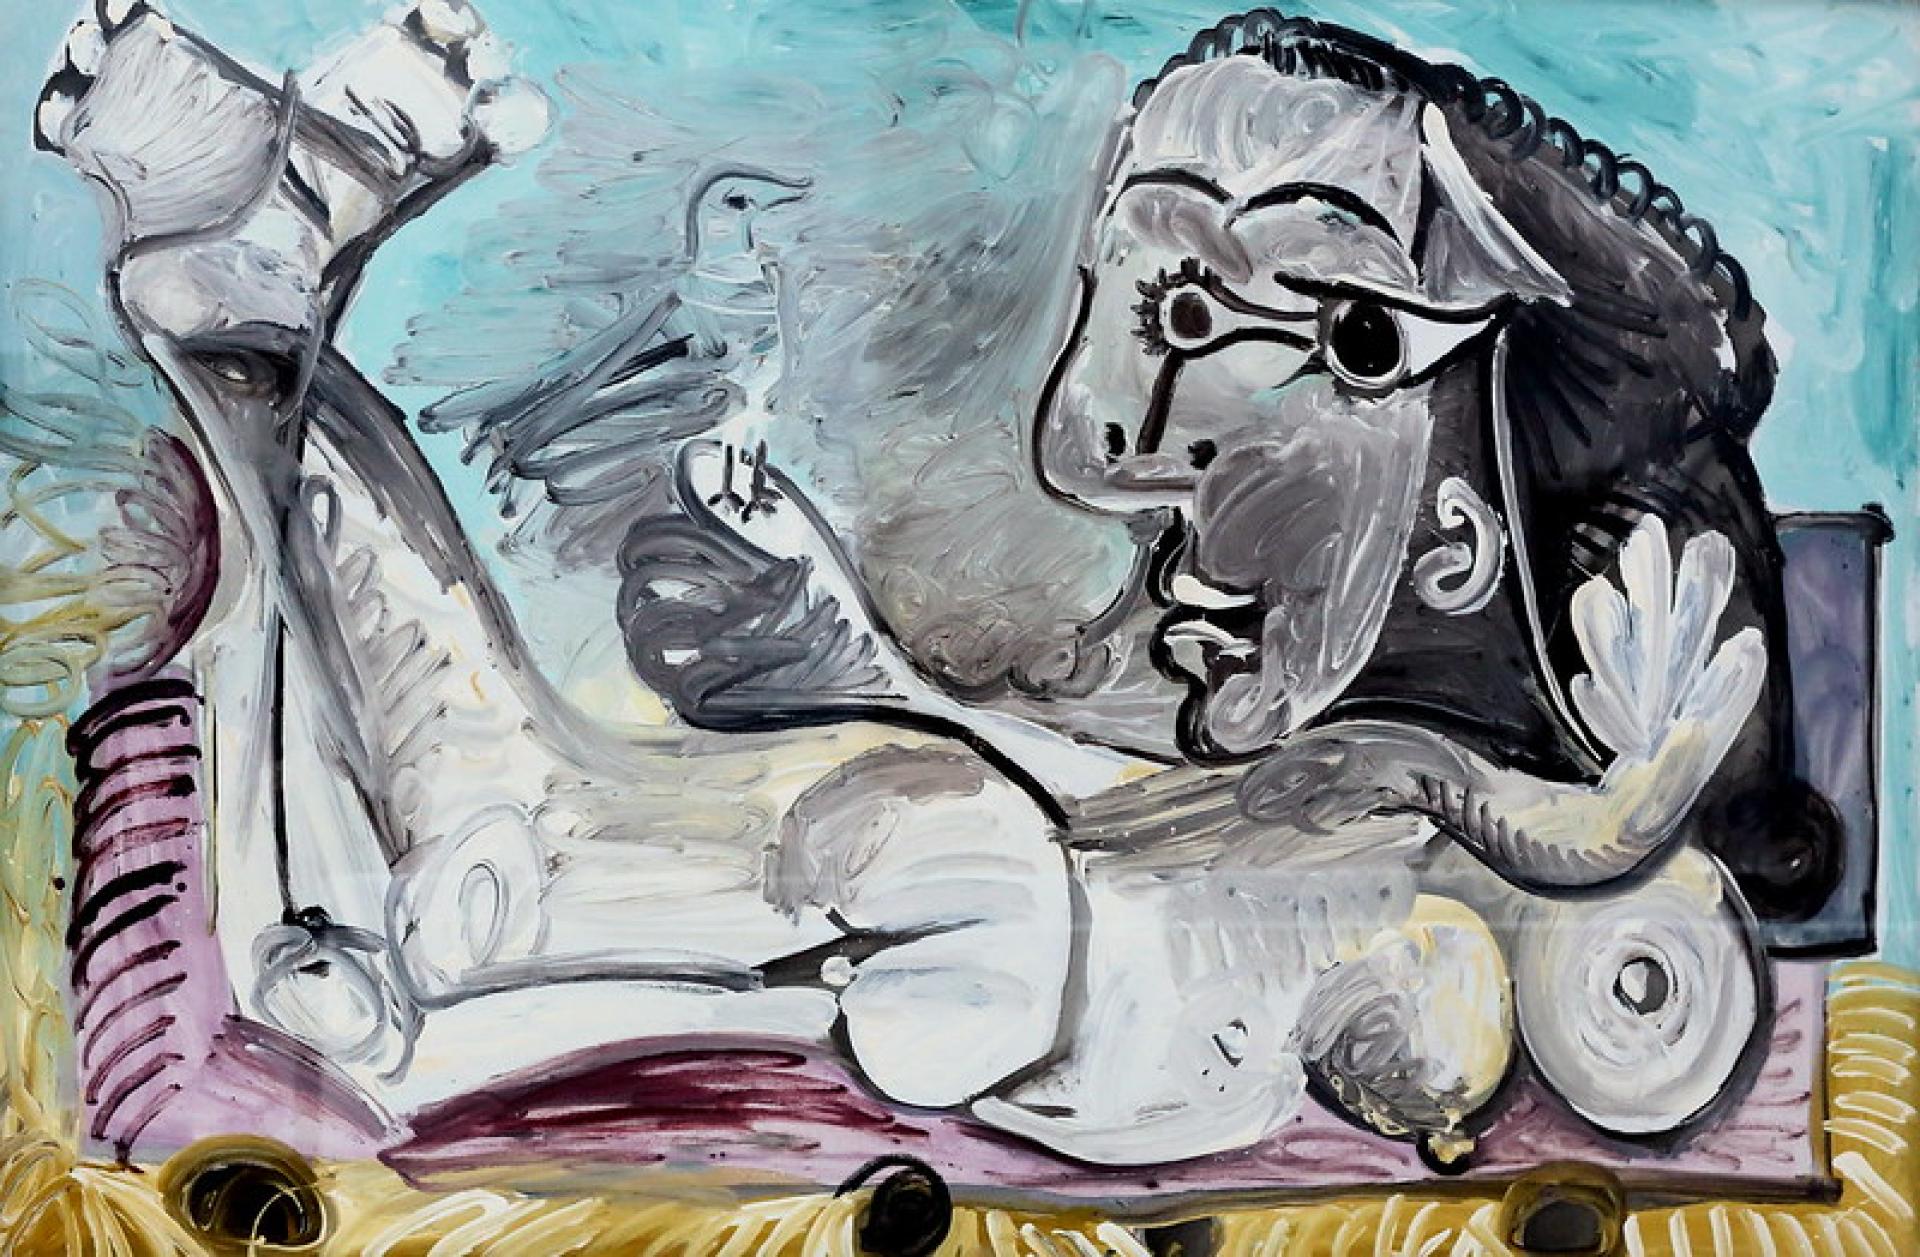 Picasso Selected works, a journey in Pablo Picasso's creativity